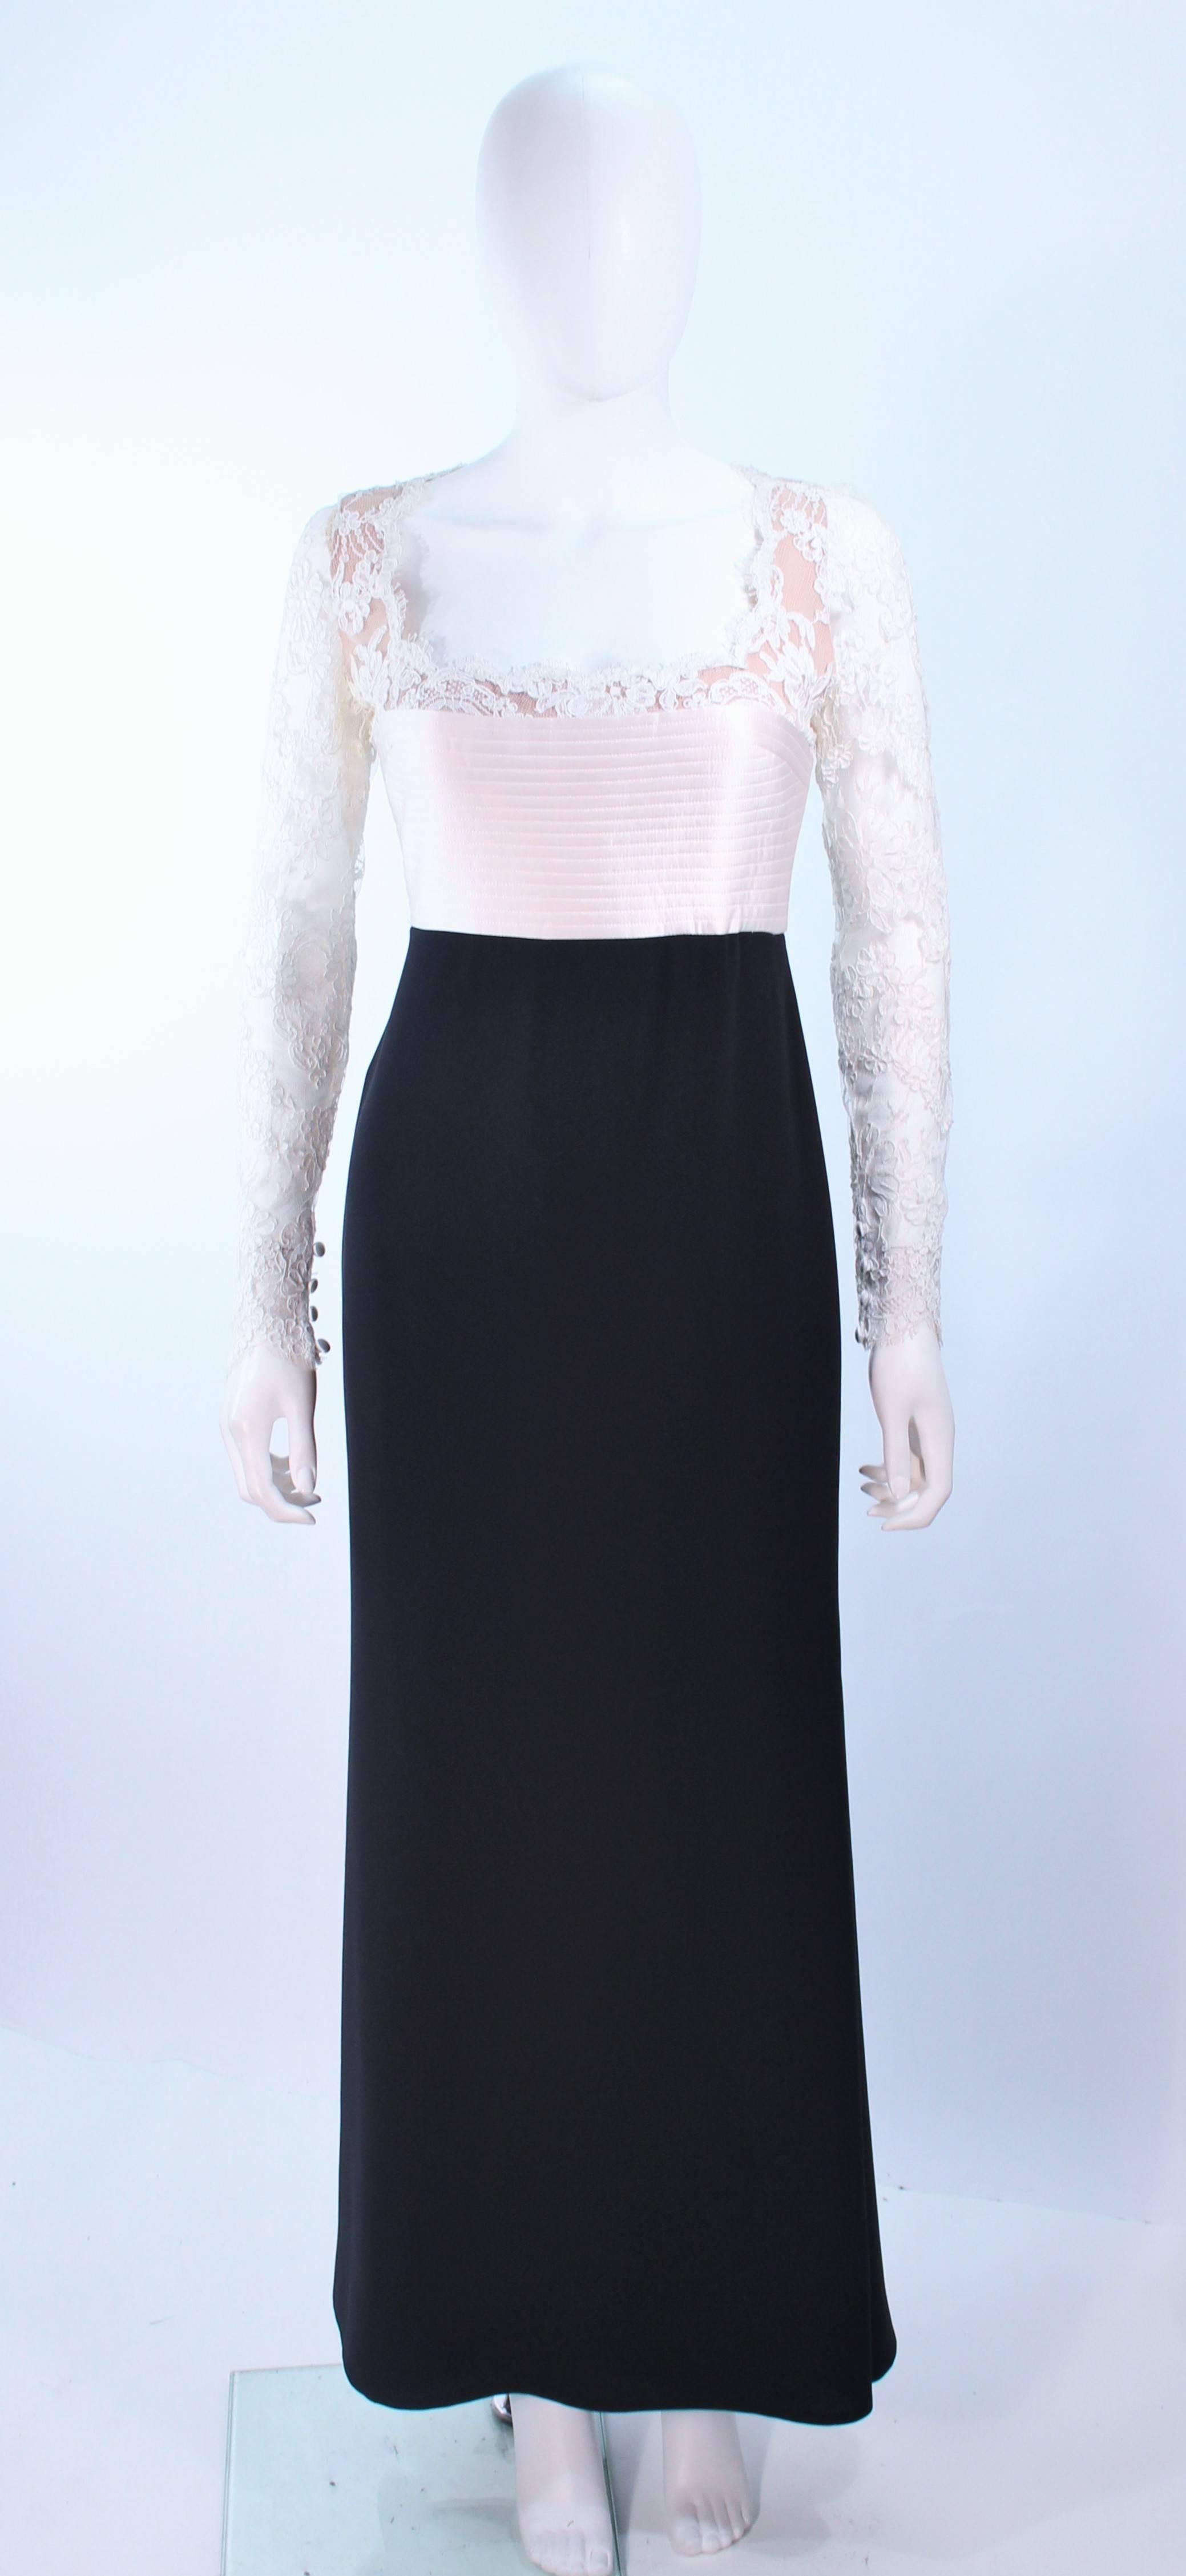 This Carolina Herrera design is composed of a white lace bodice, with top-stitched satin waist, and black skirt. There is a center back zipper with buttons. In excellent vintage condition.

**Please cross-reference measurements for personal